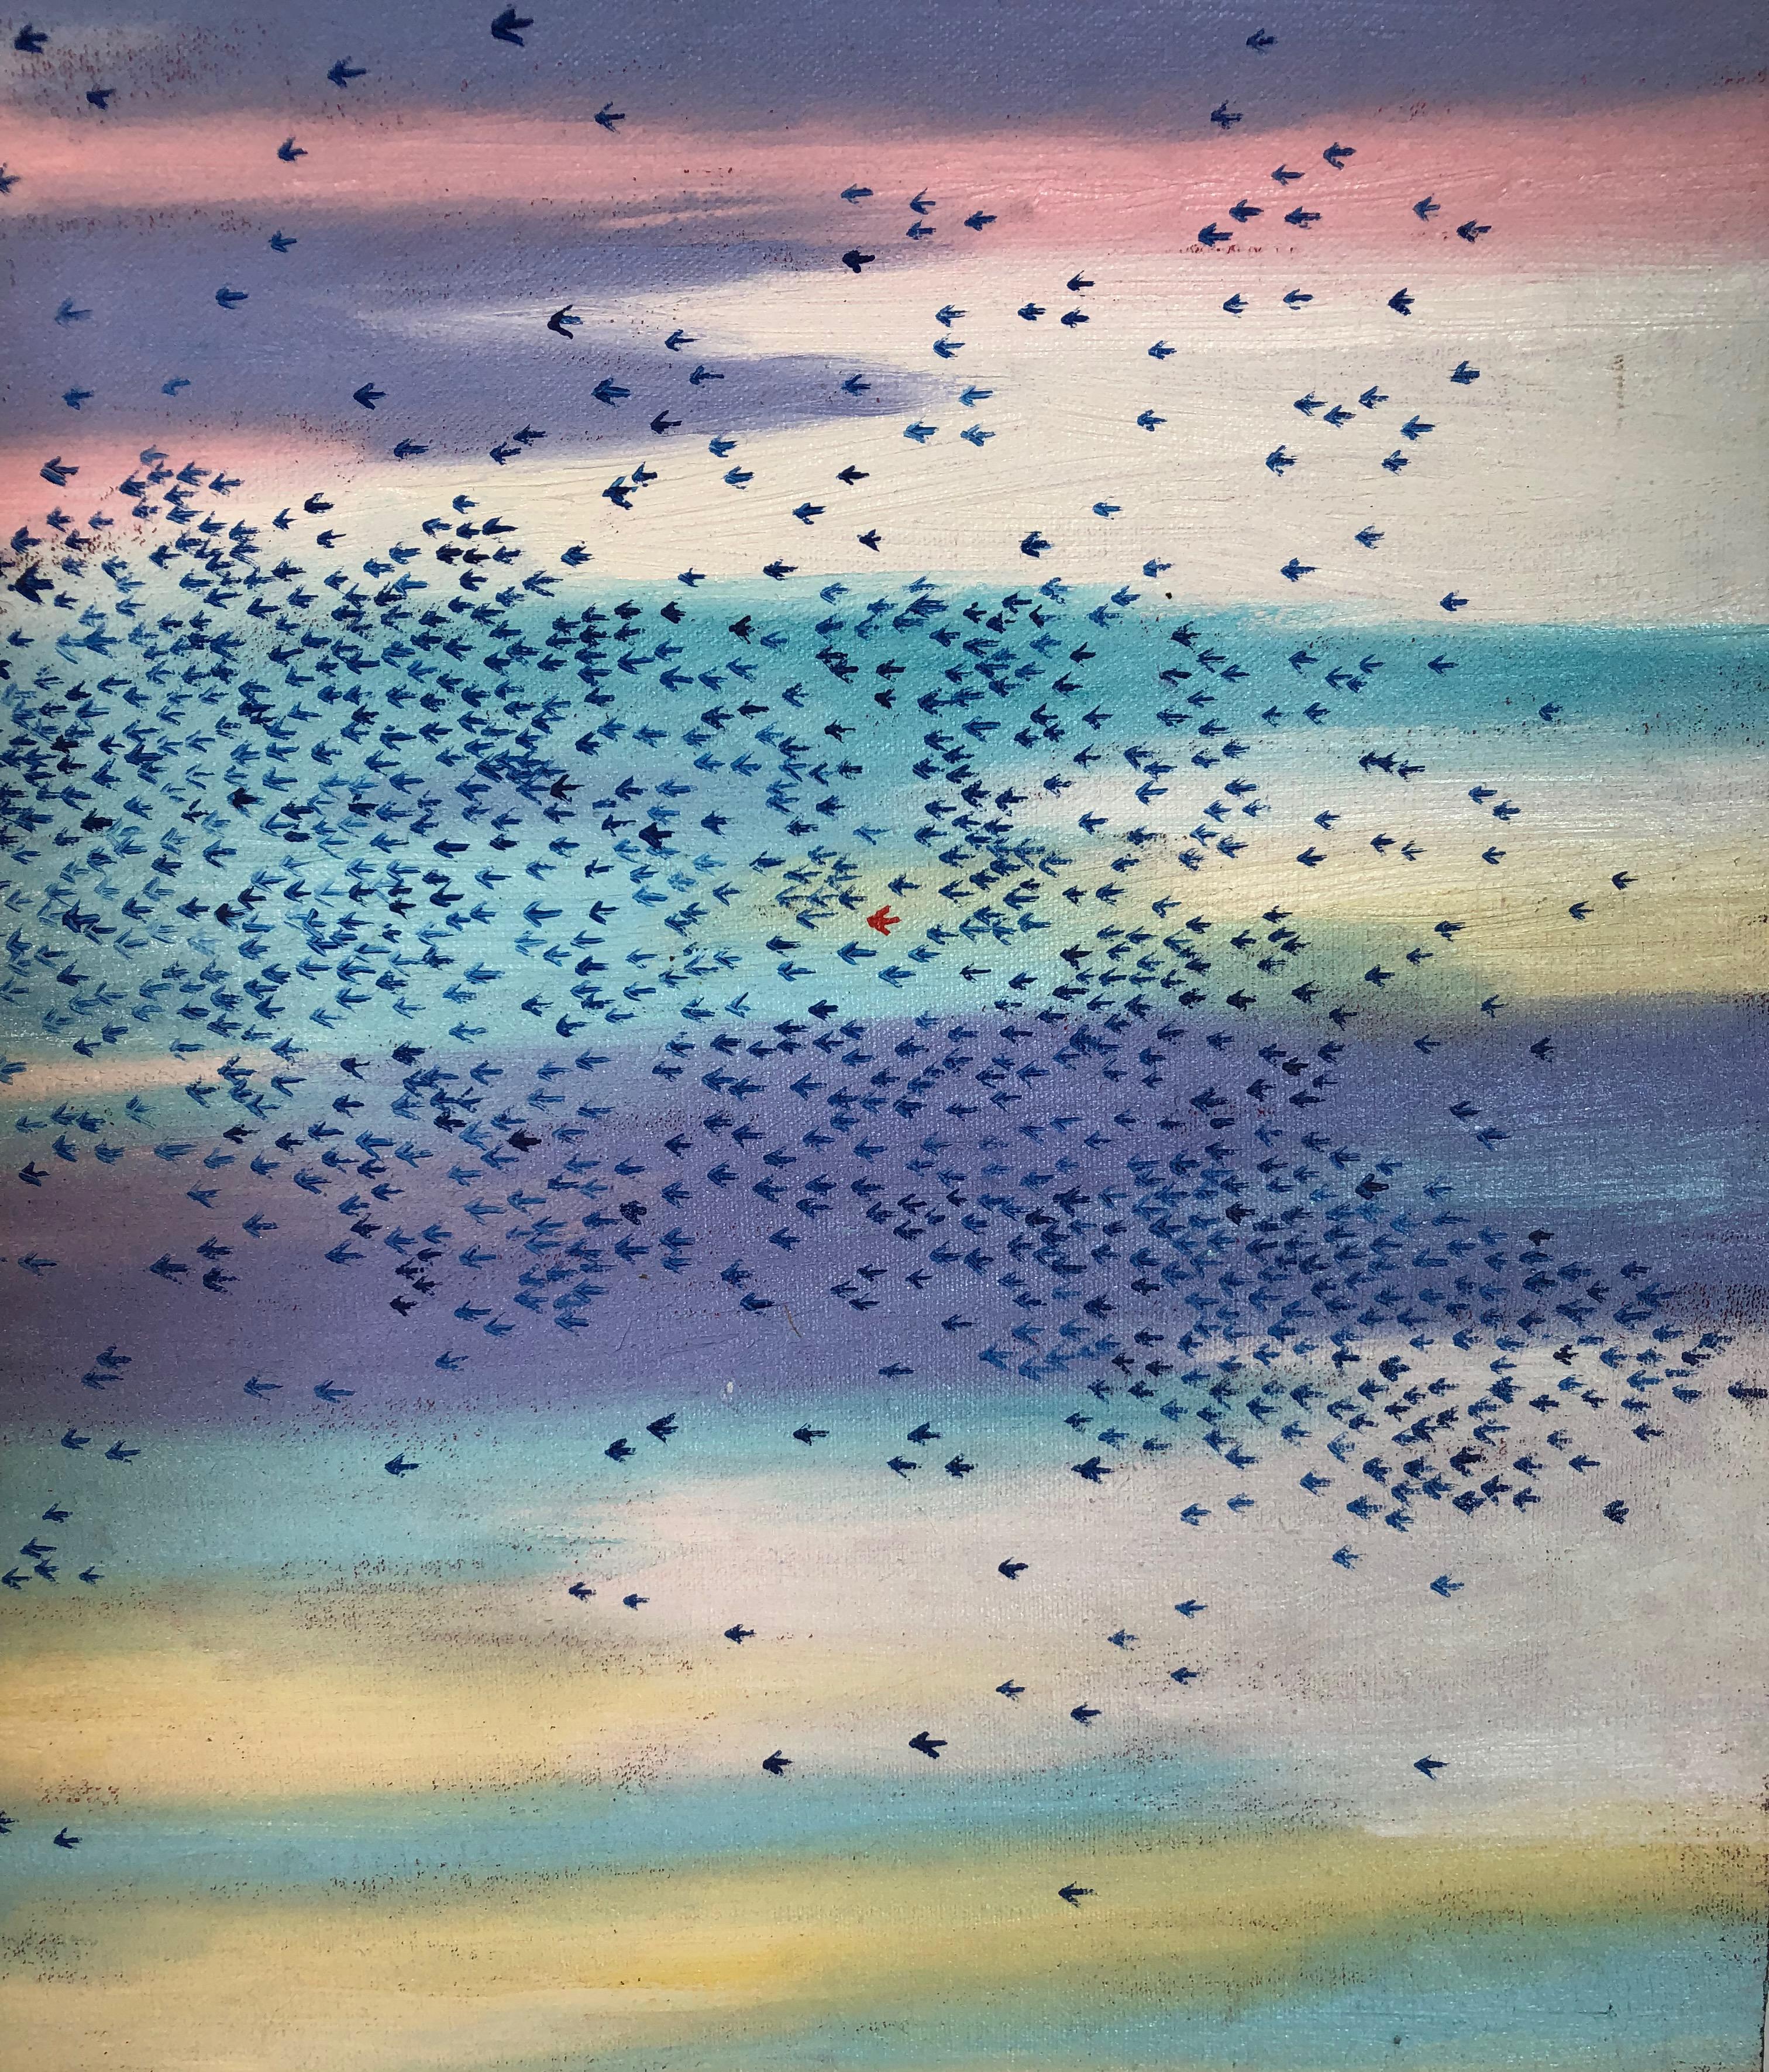 this 2018 Painting by Francis X. Pavy depicts a flock of migrating birds, characteristic of all of southwestern Louisiana, where there are many migrating flocks of ducks, cedar, waxwings, blackbirds, as well as geese, and other migratory birds. The